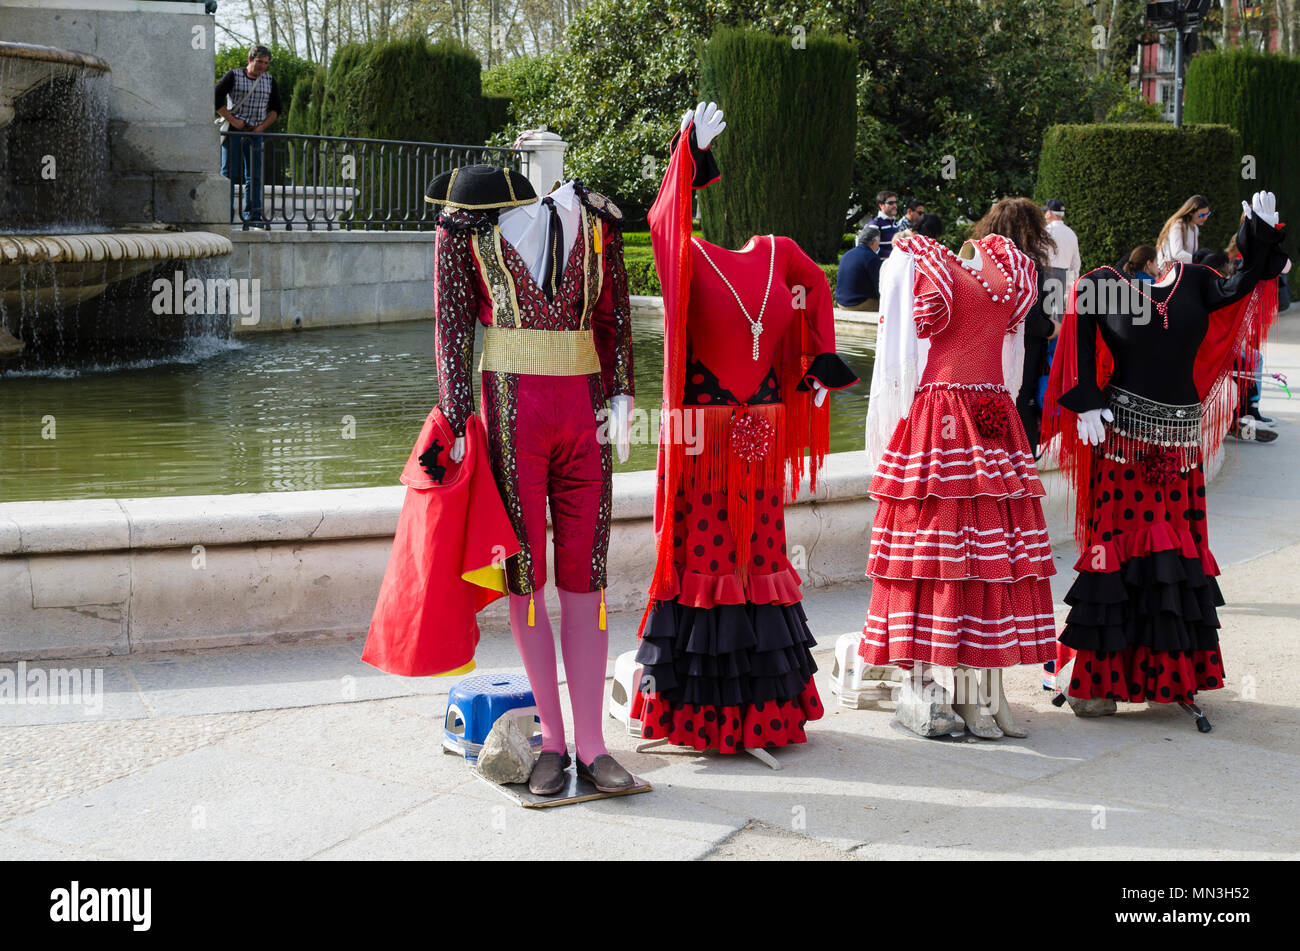 A folklore dress closed to Orient Palace, Madrid city, Spain. Stock Photo